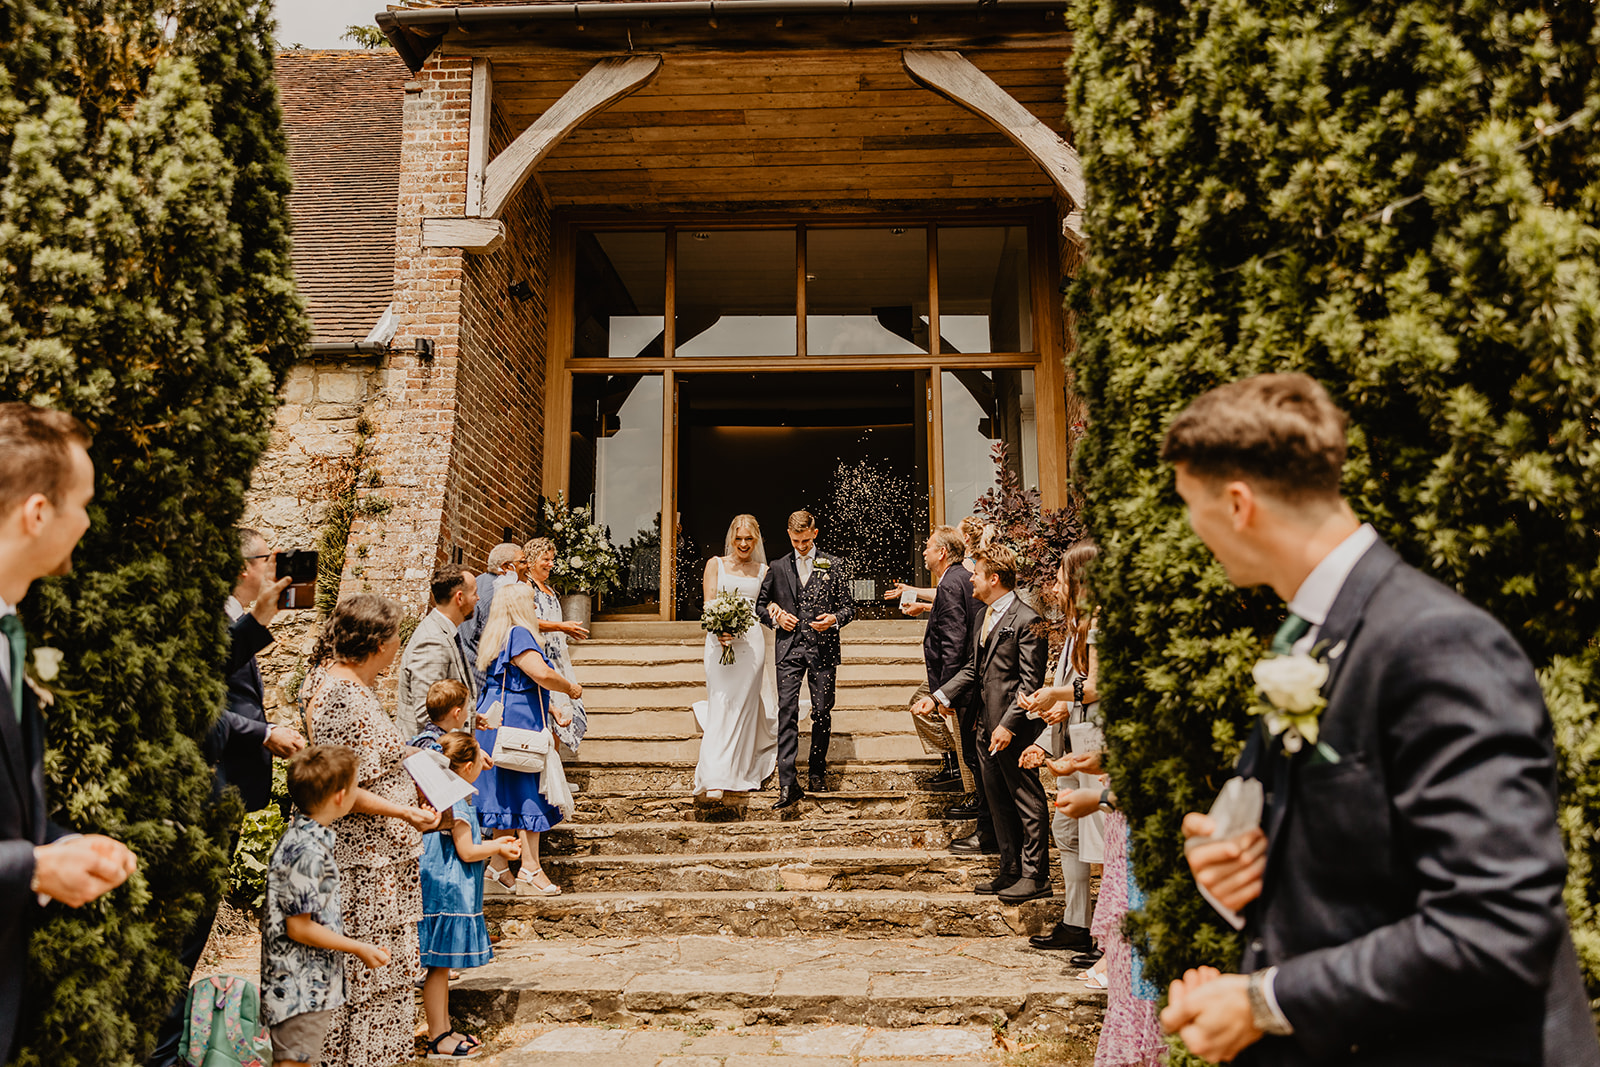 Bride and groom walking under confetti at a Bury Manor Barn Wedding in Sussex. Photographer OliveJoy Photography.